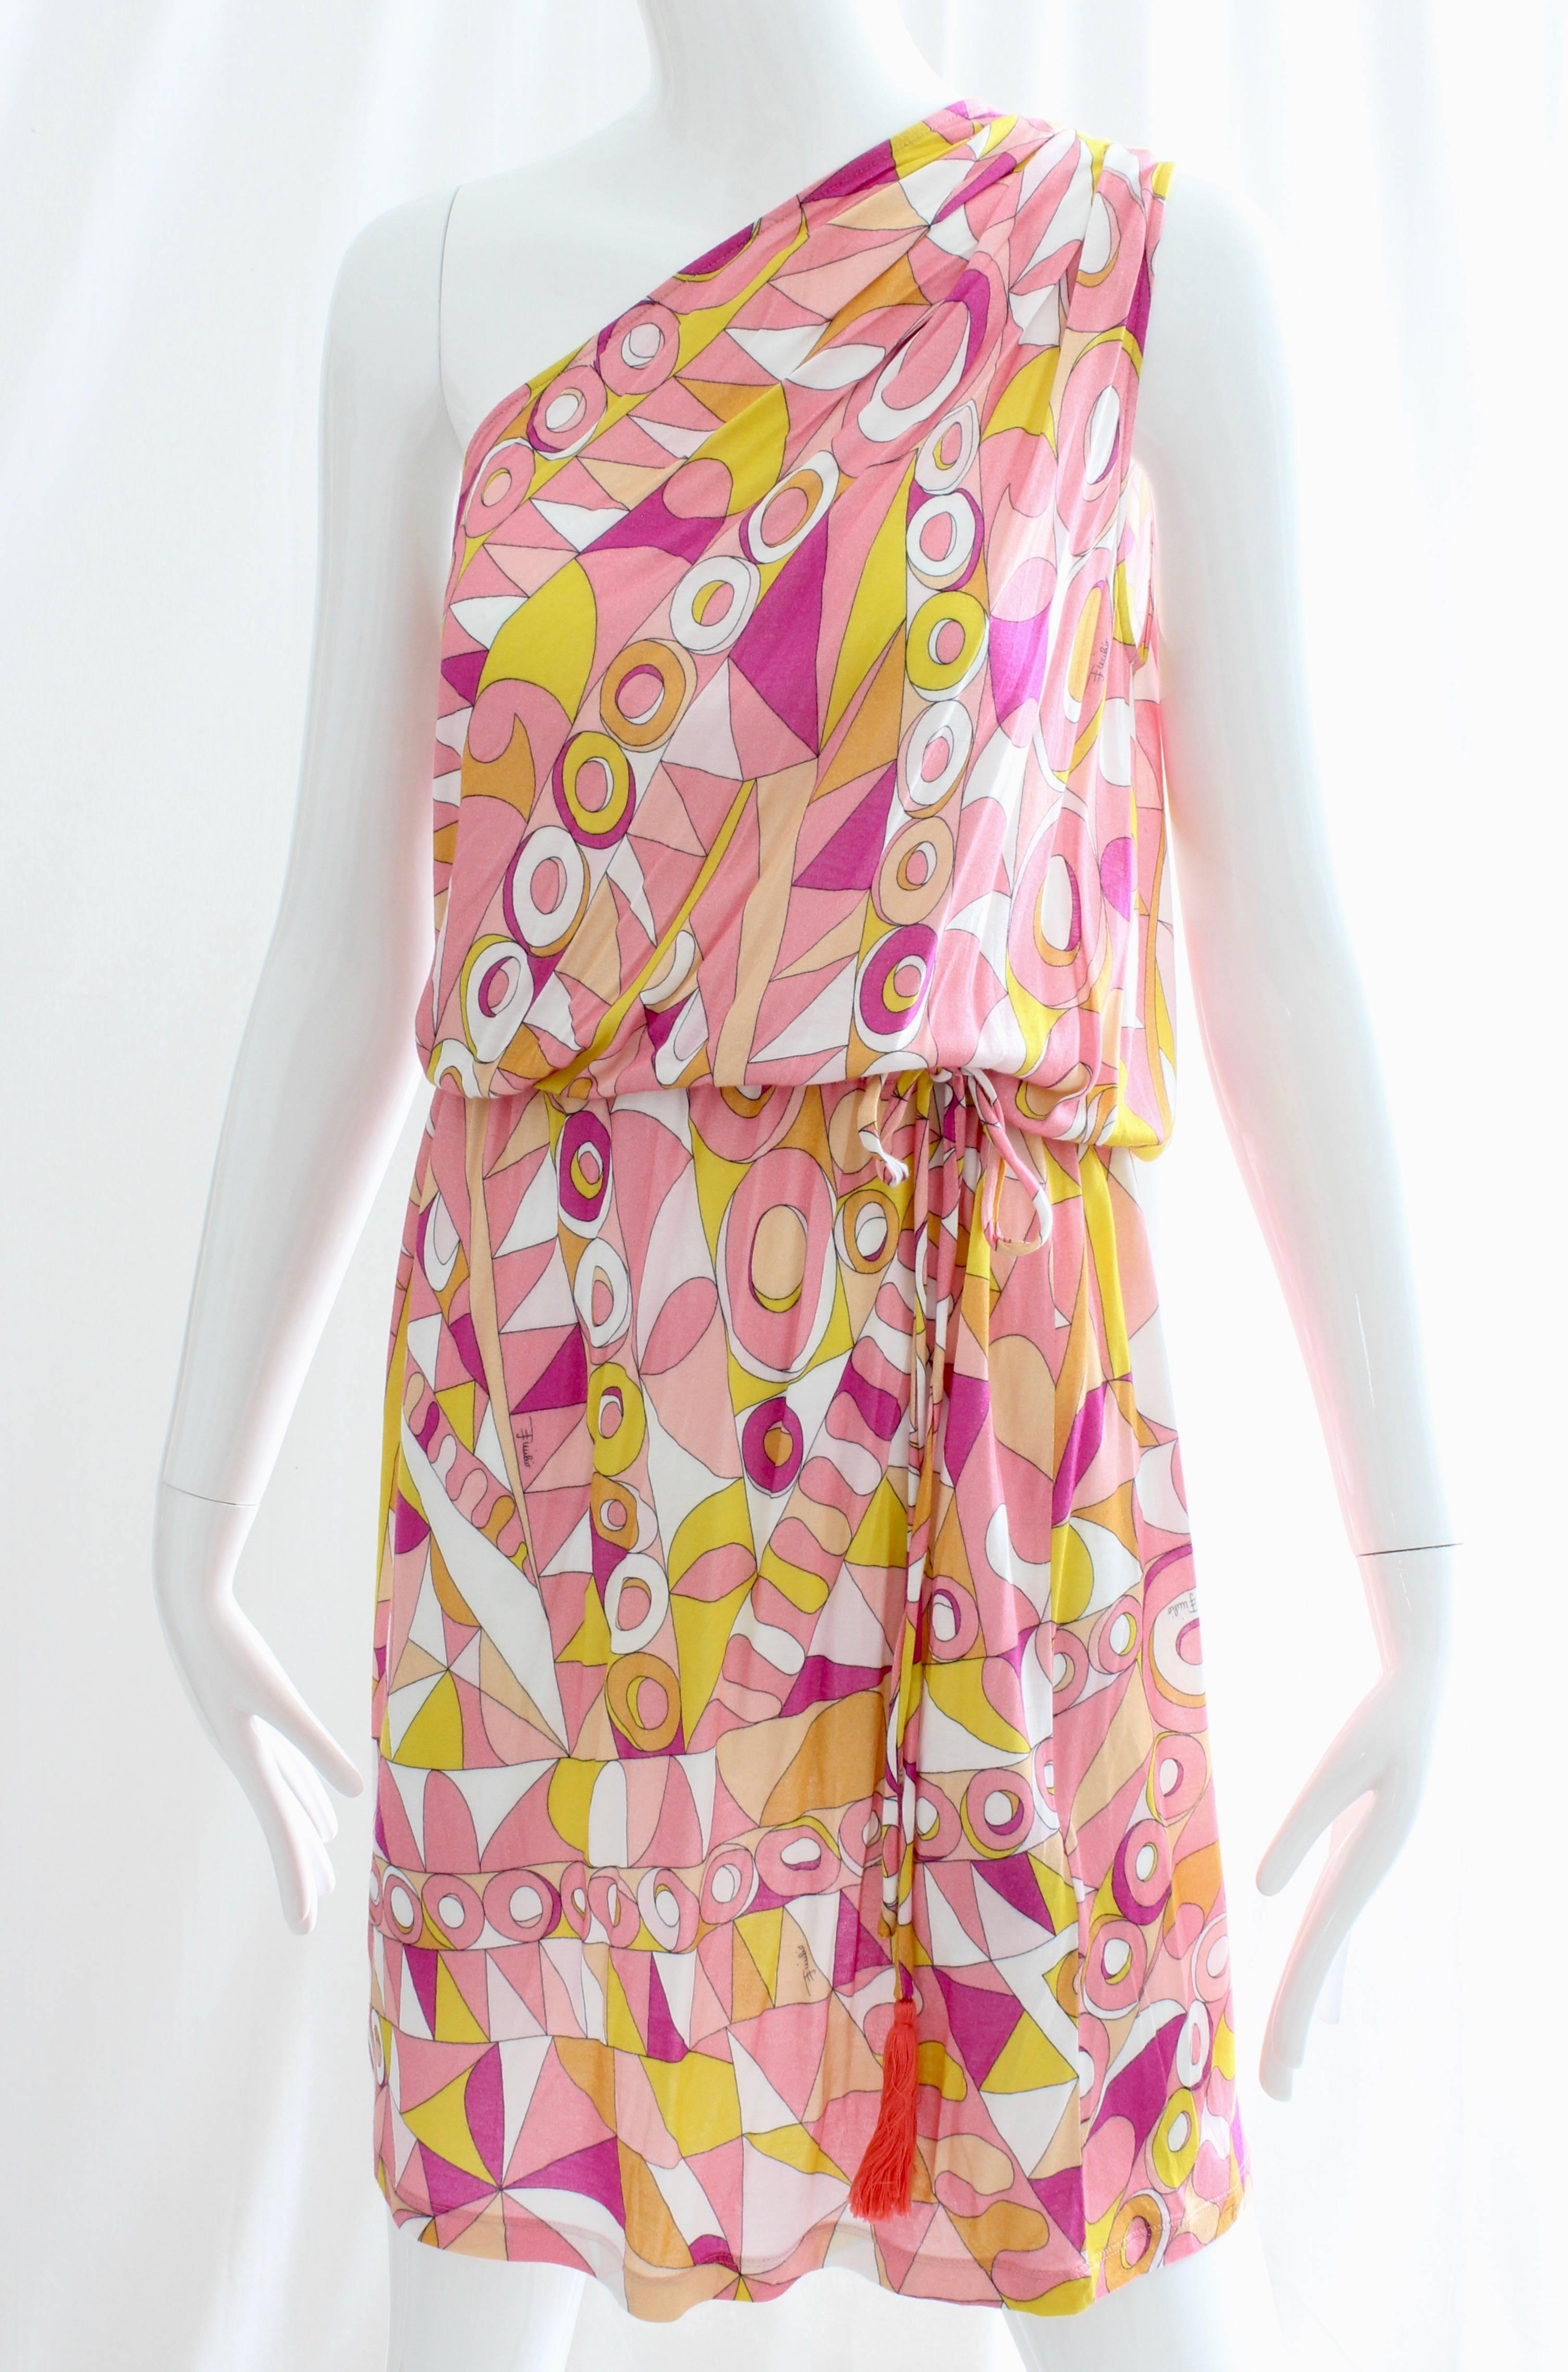 This chic little one shoulder dress or beach romper was made by Emilio Pucci.  Made from viscose, it features an abstract print, an attached drawstring with tassels at the waist and is unlined.  Perfect for your summer jaunts and adventures! New